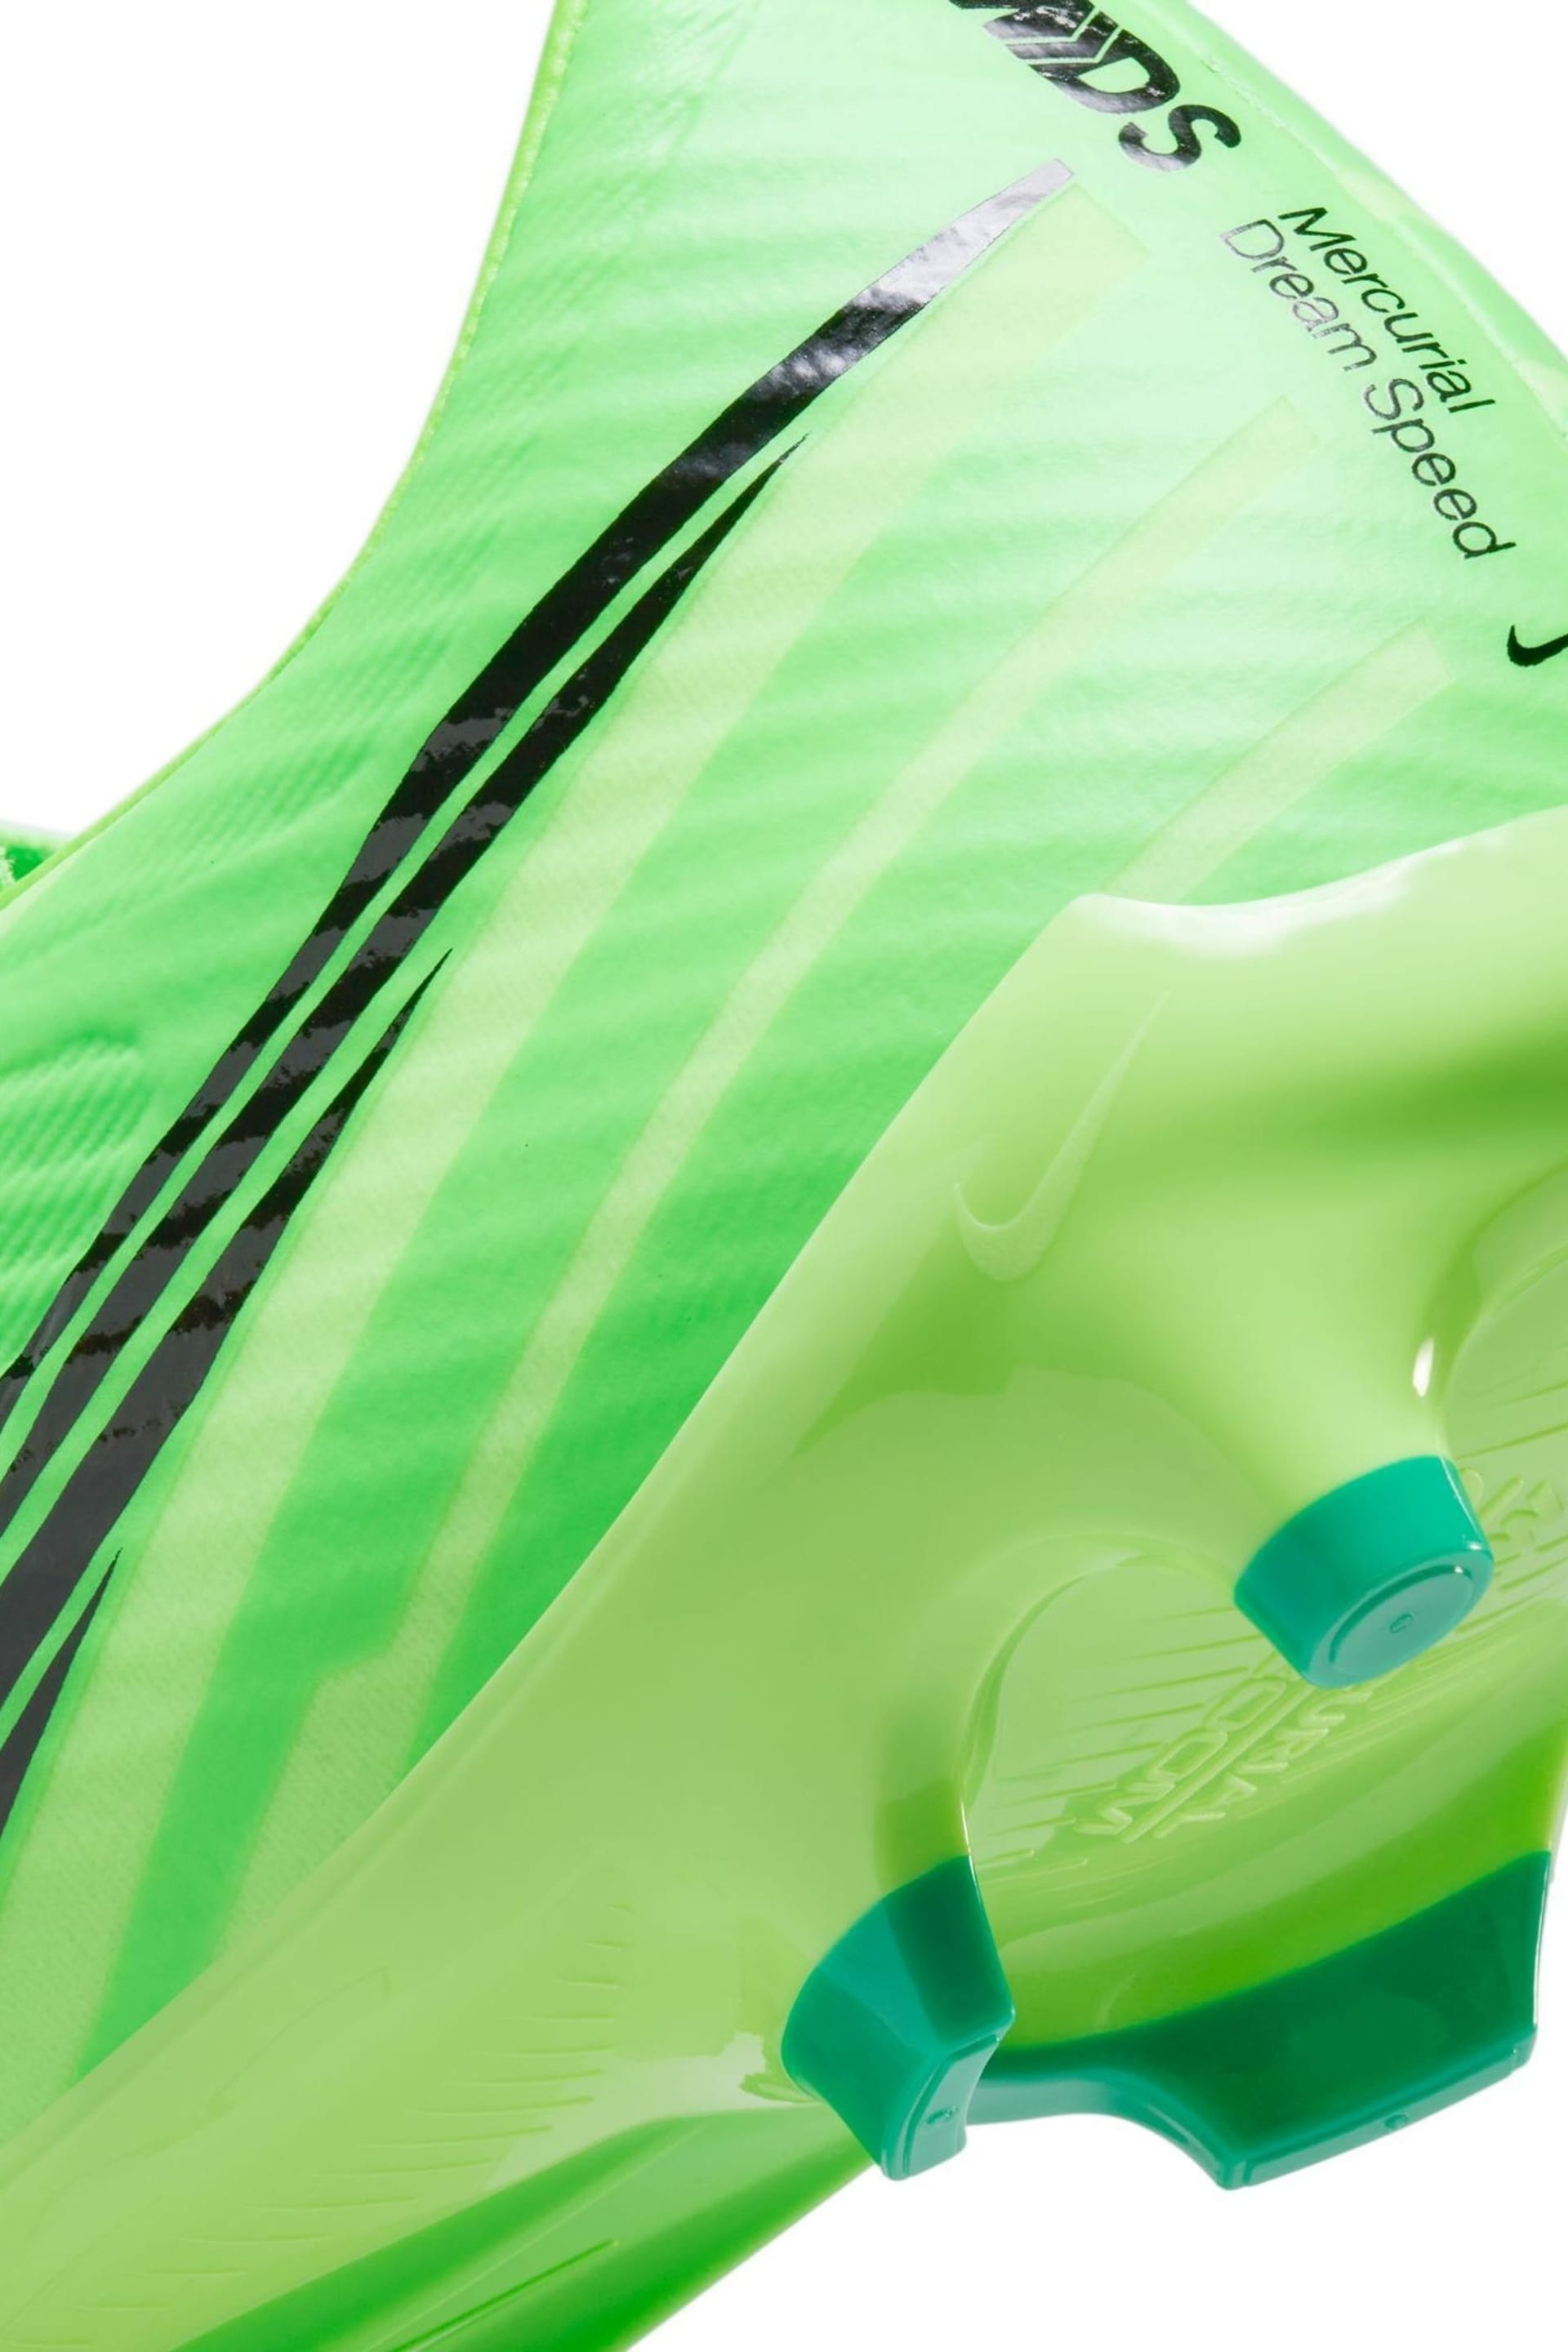 Nike Barely Green/Gold Zoom Vapor 15 Academy Multi Ground Football Boots - Image 11 of 11